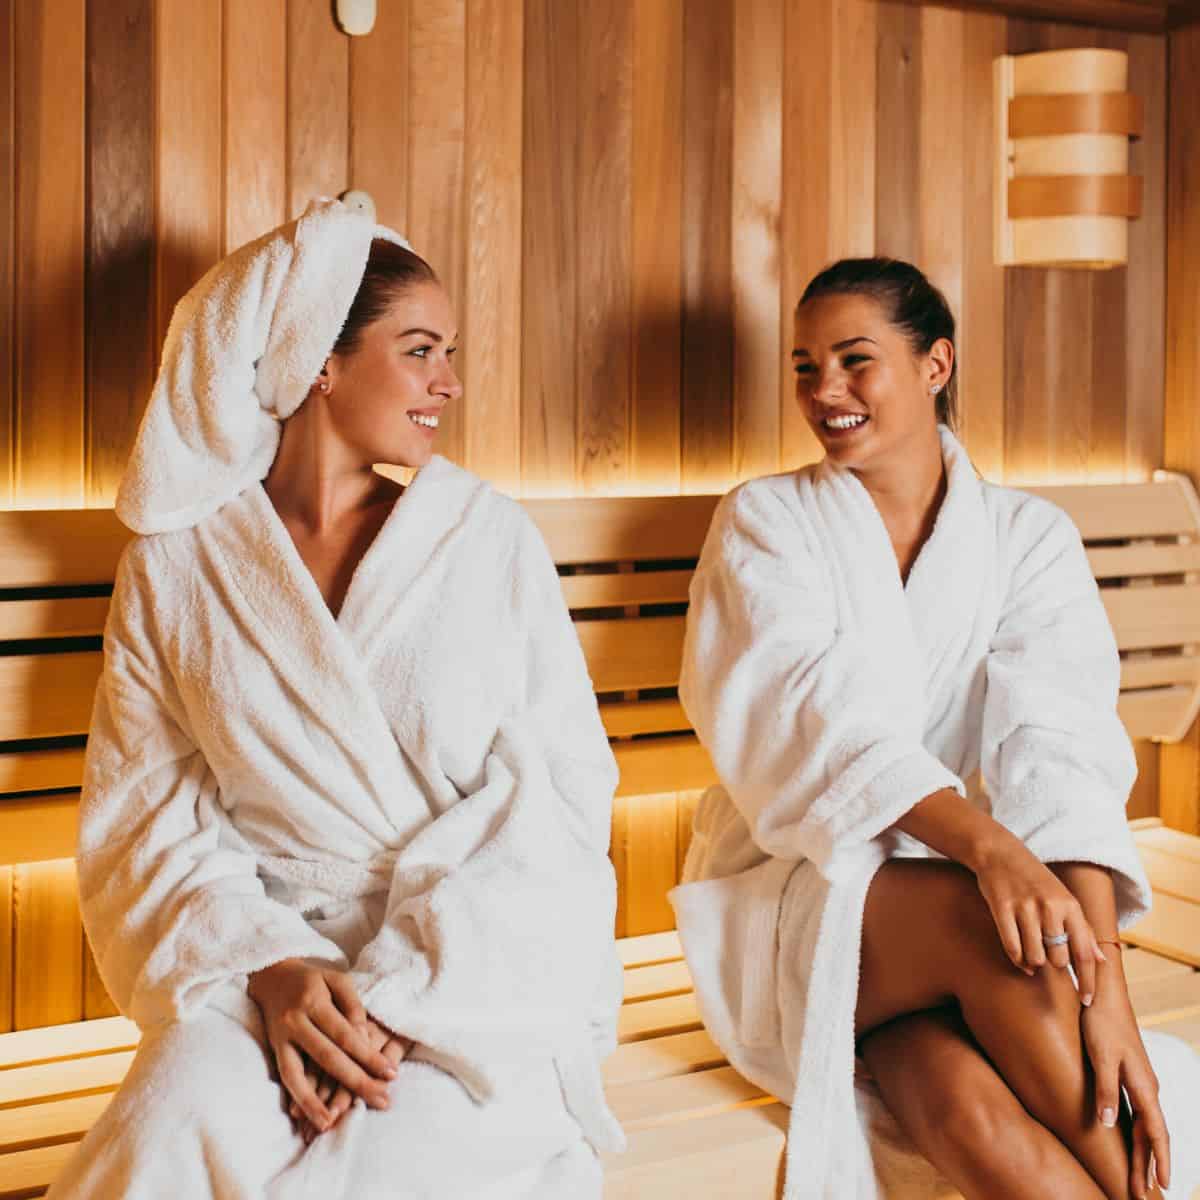 two ladies at the sauna.